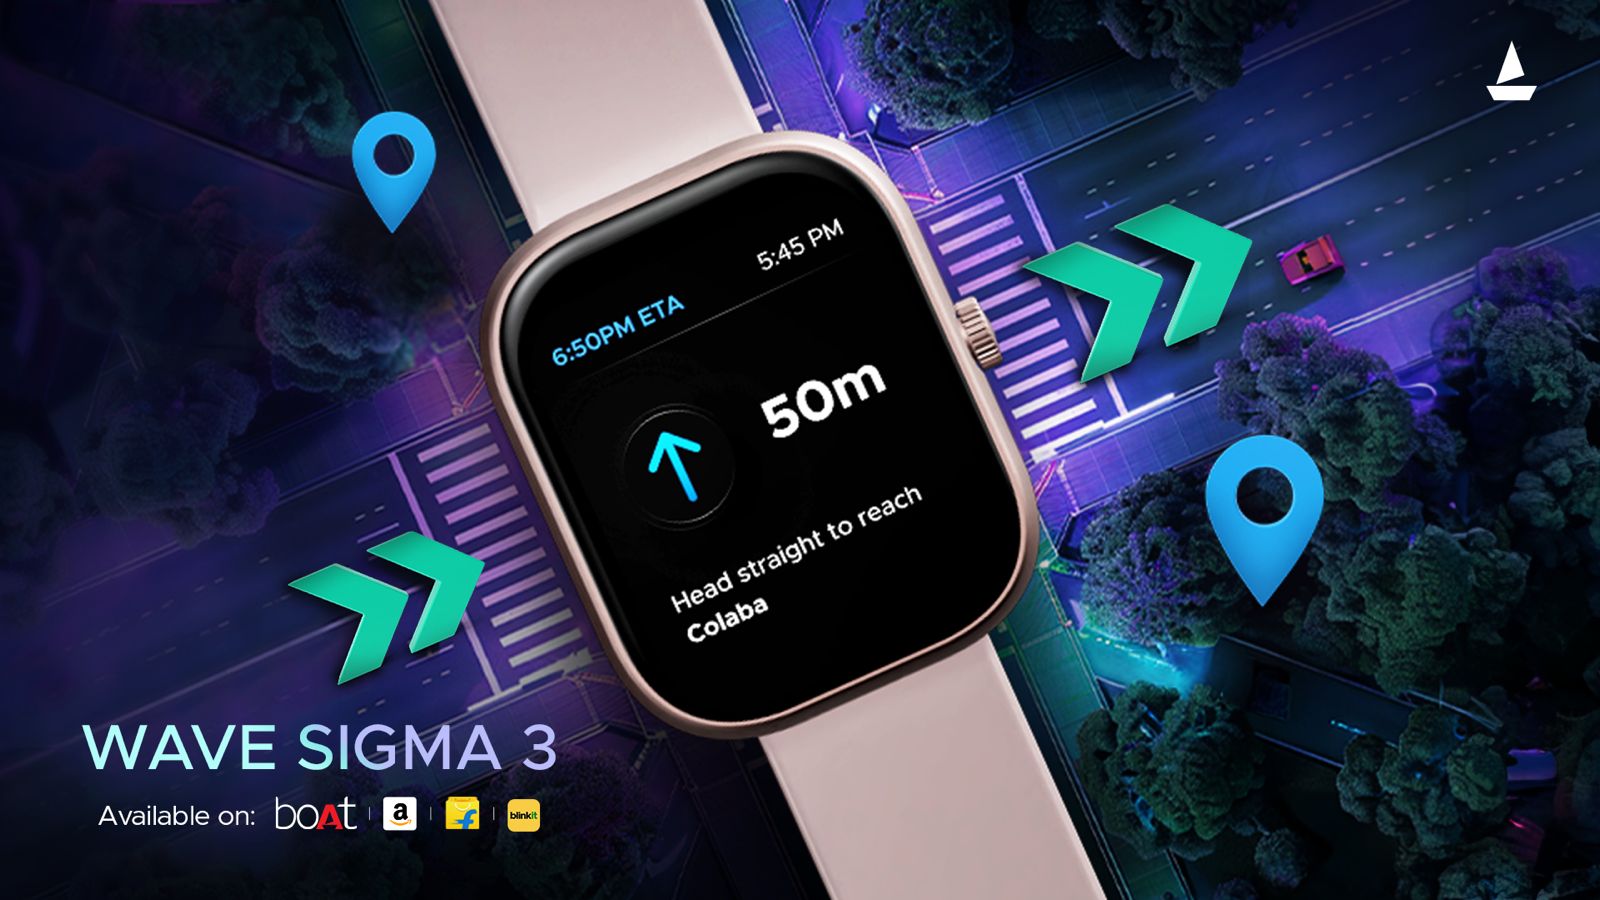 boAt has launched its latest smartwatch – the Wave Sigma 3 made with aluminum alloy case